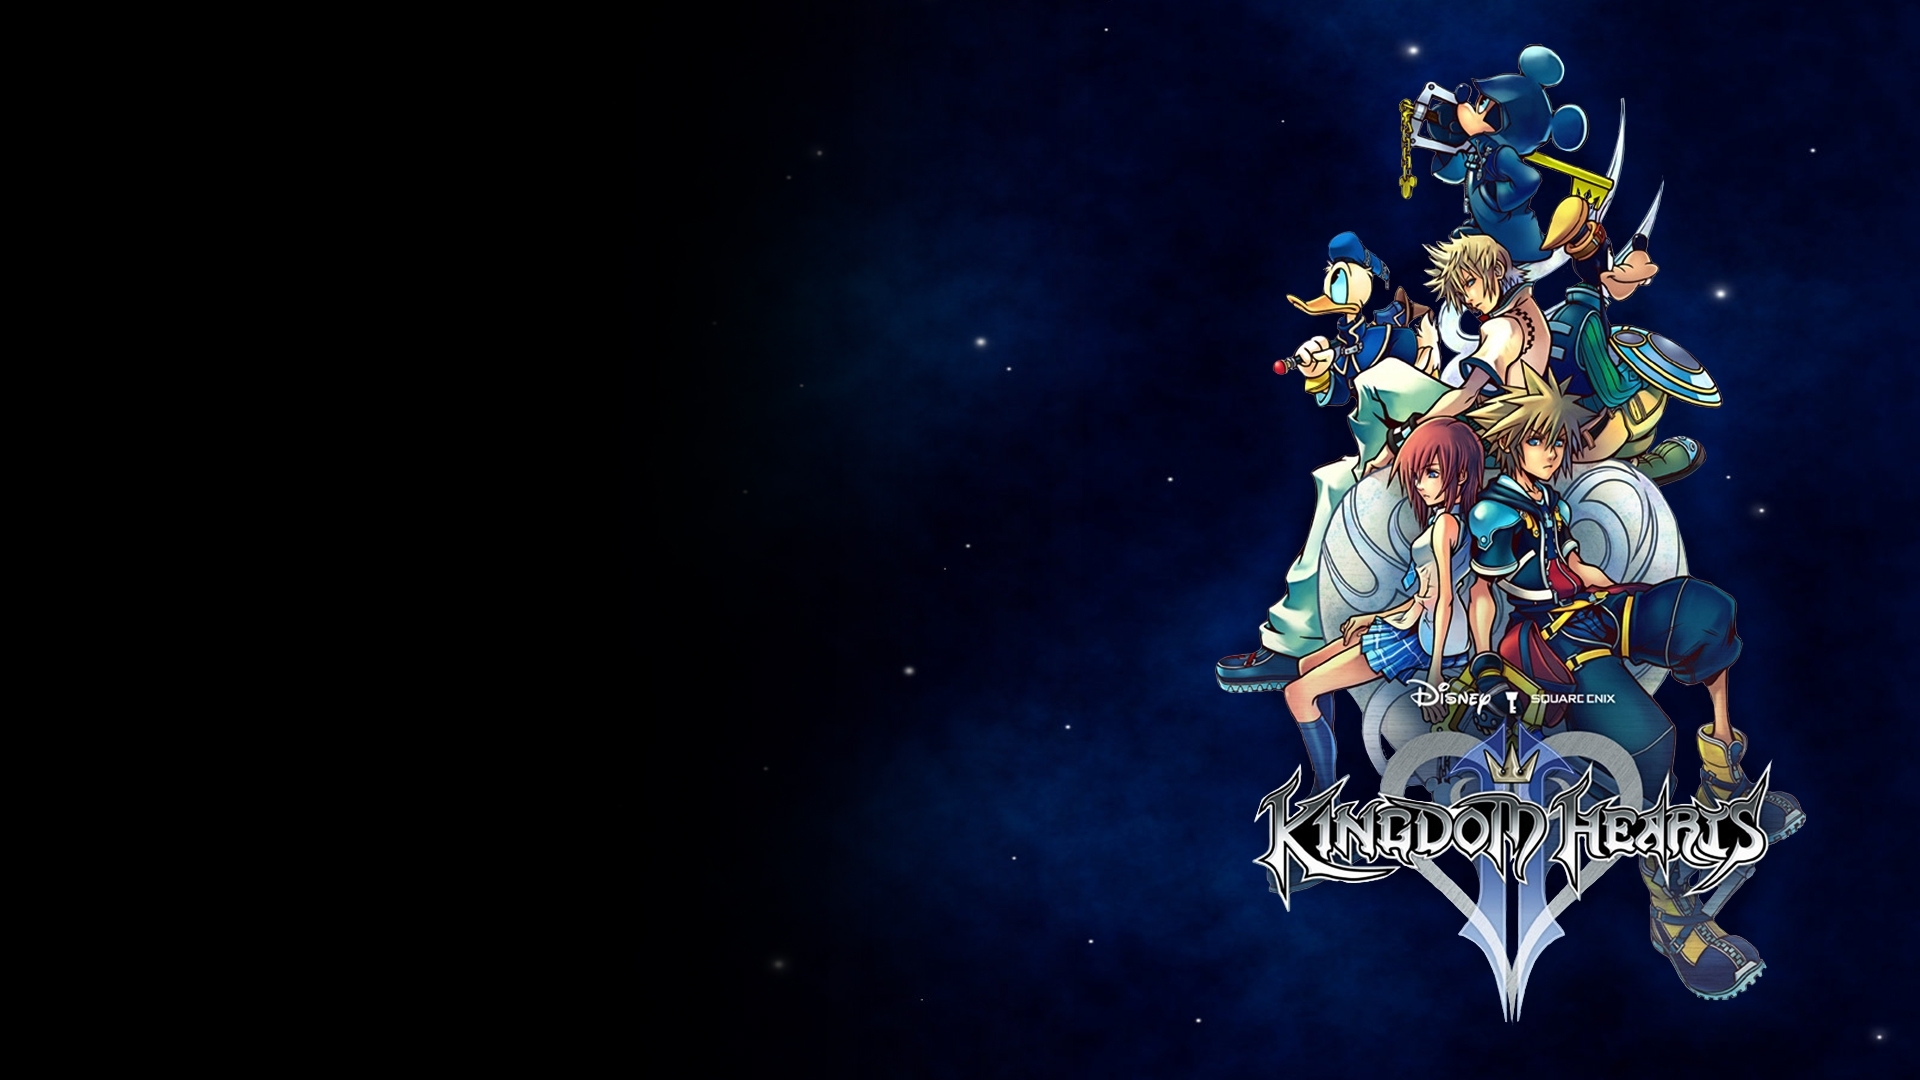 10 New Kingdom Hearts Desktop Backgrounds Hd FULL HD 1080p For PC Background